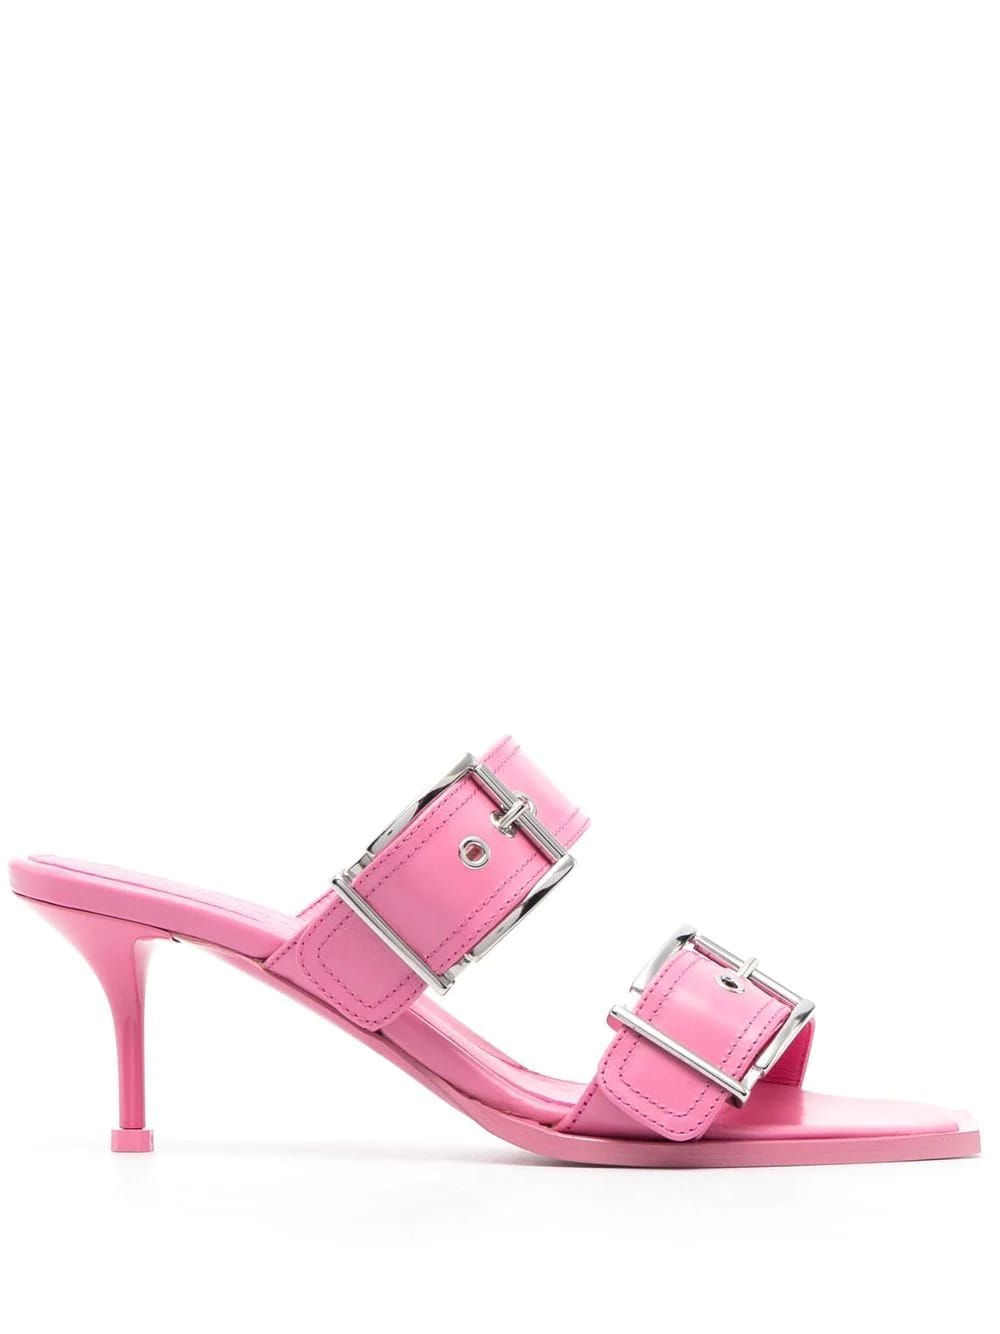 ALEXANDER MCQUEEN PINK PUNK SANDAL WITH DOUBLE BUCKLE